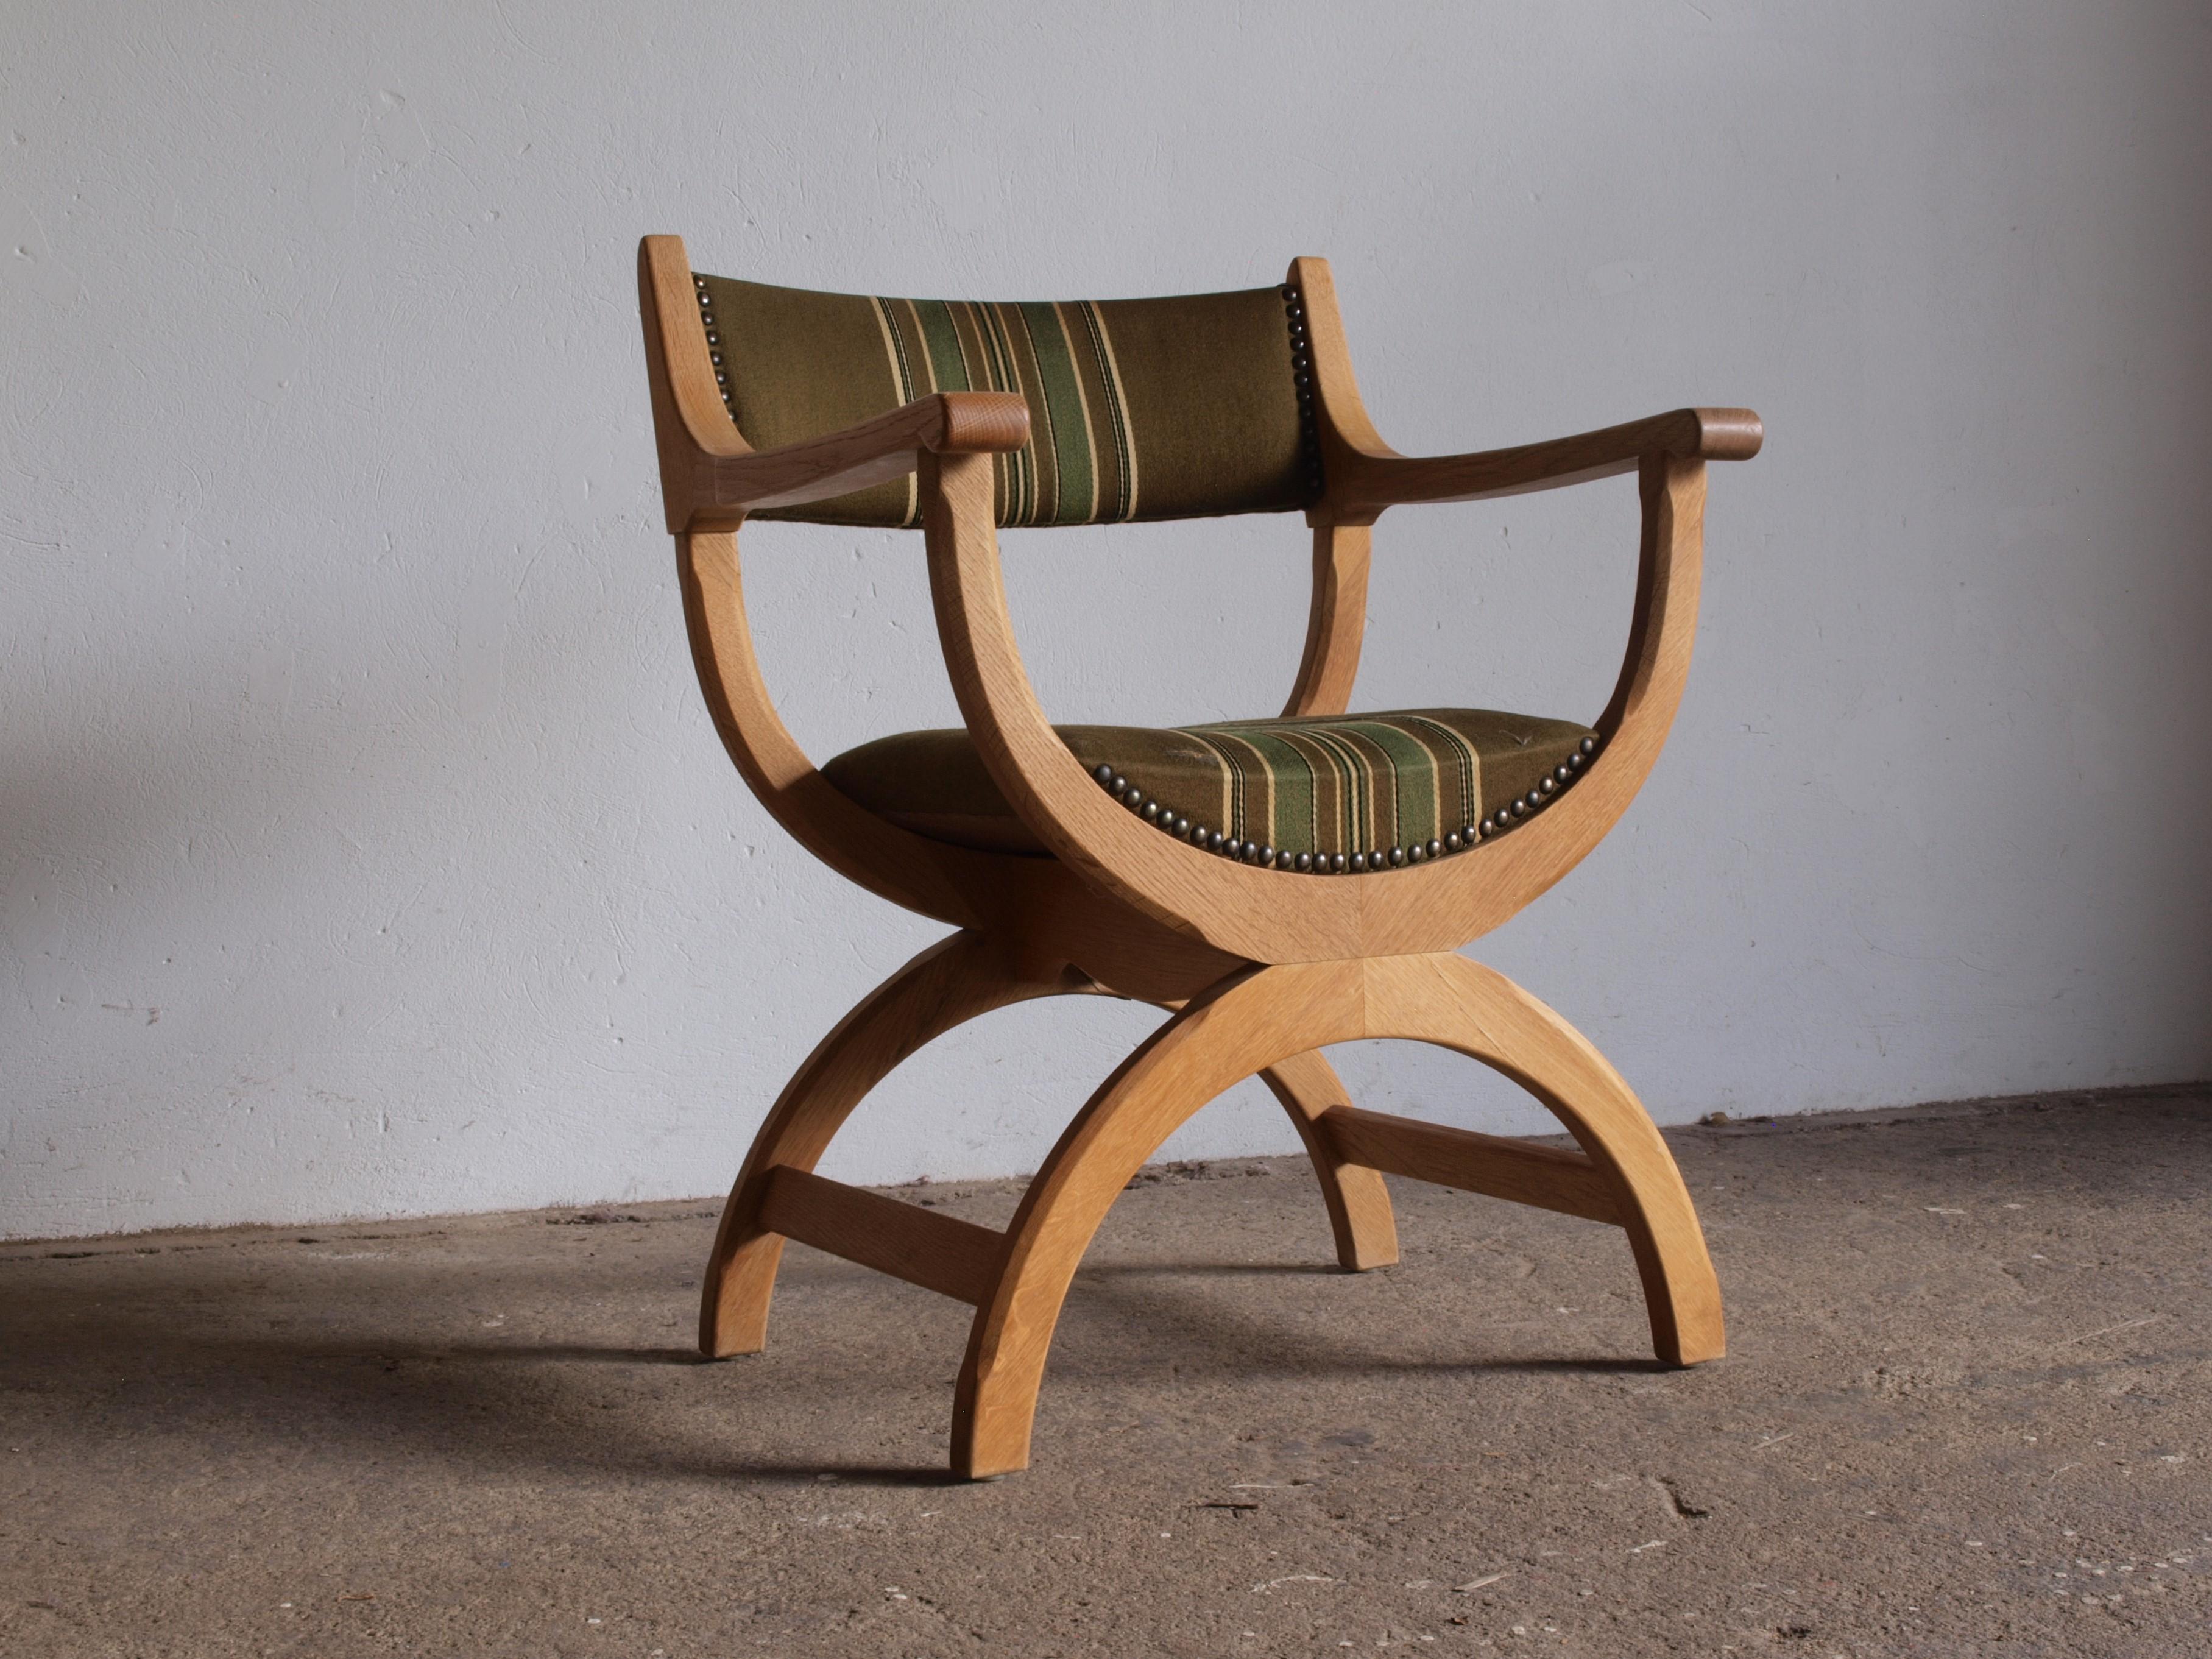 A beautifully crafted armchair in solid oak. This chair, known as 